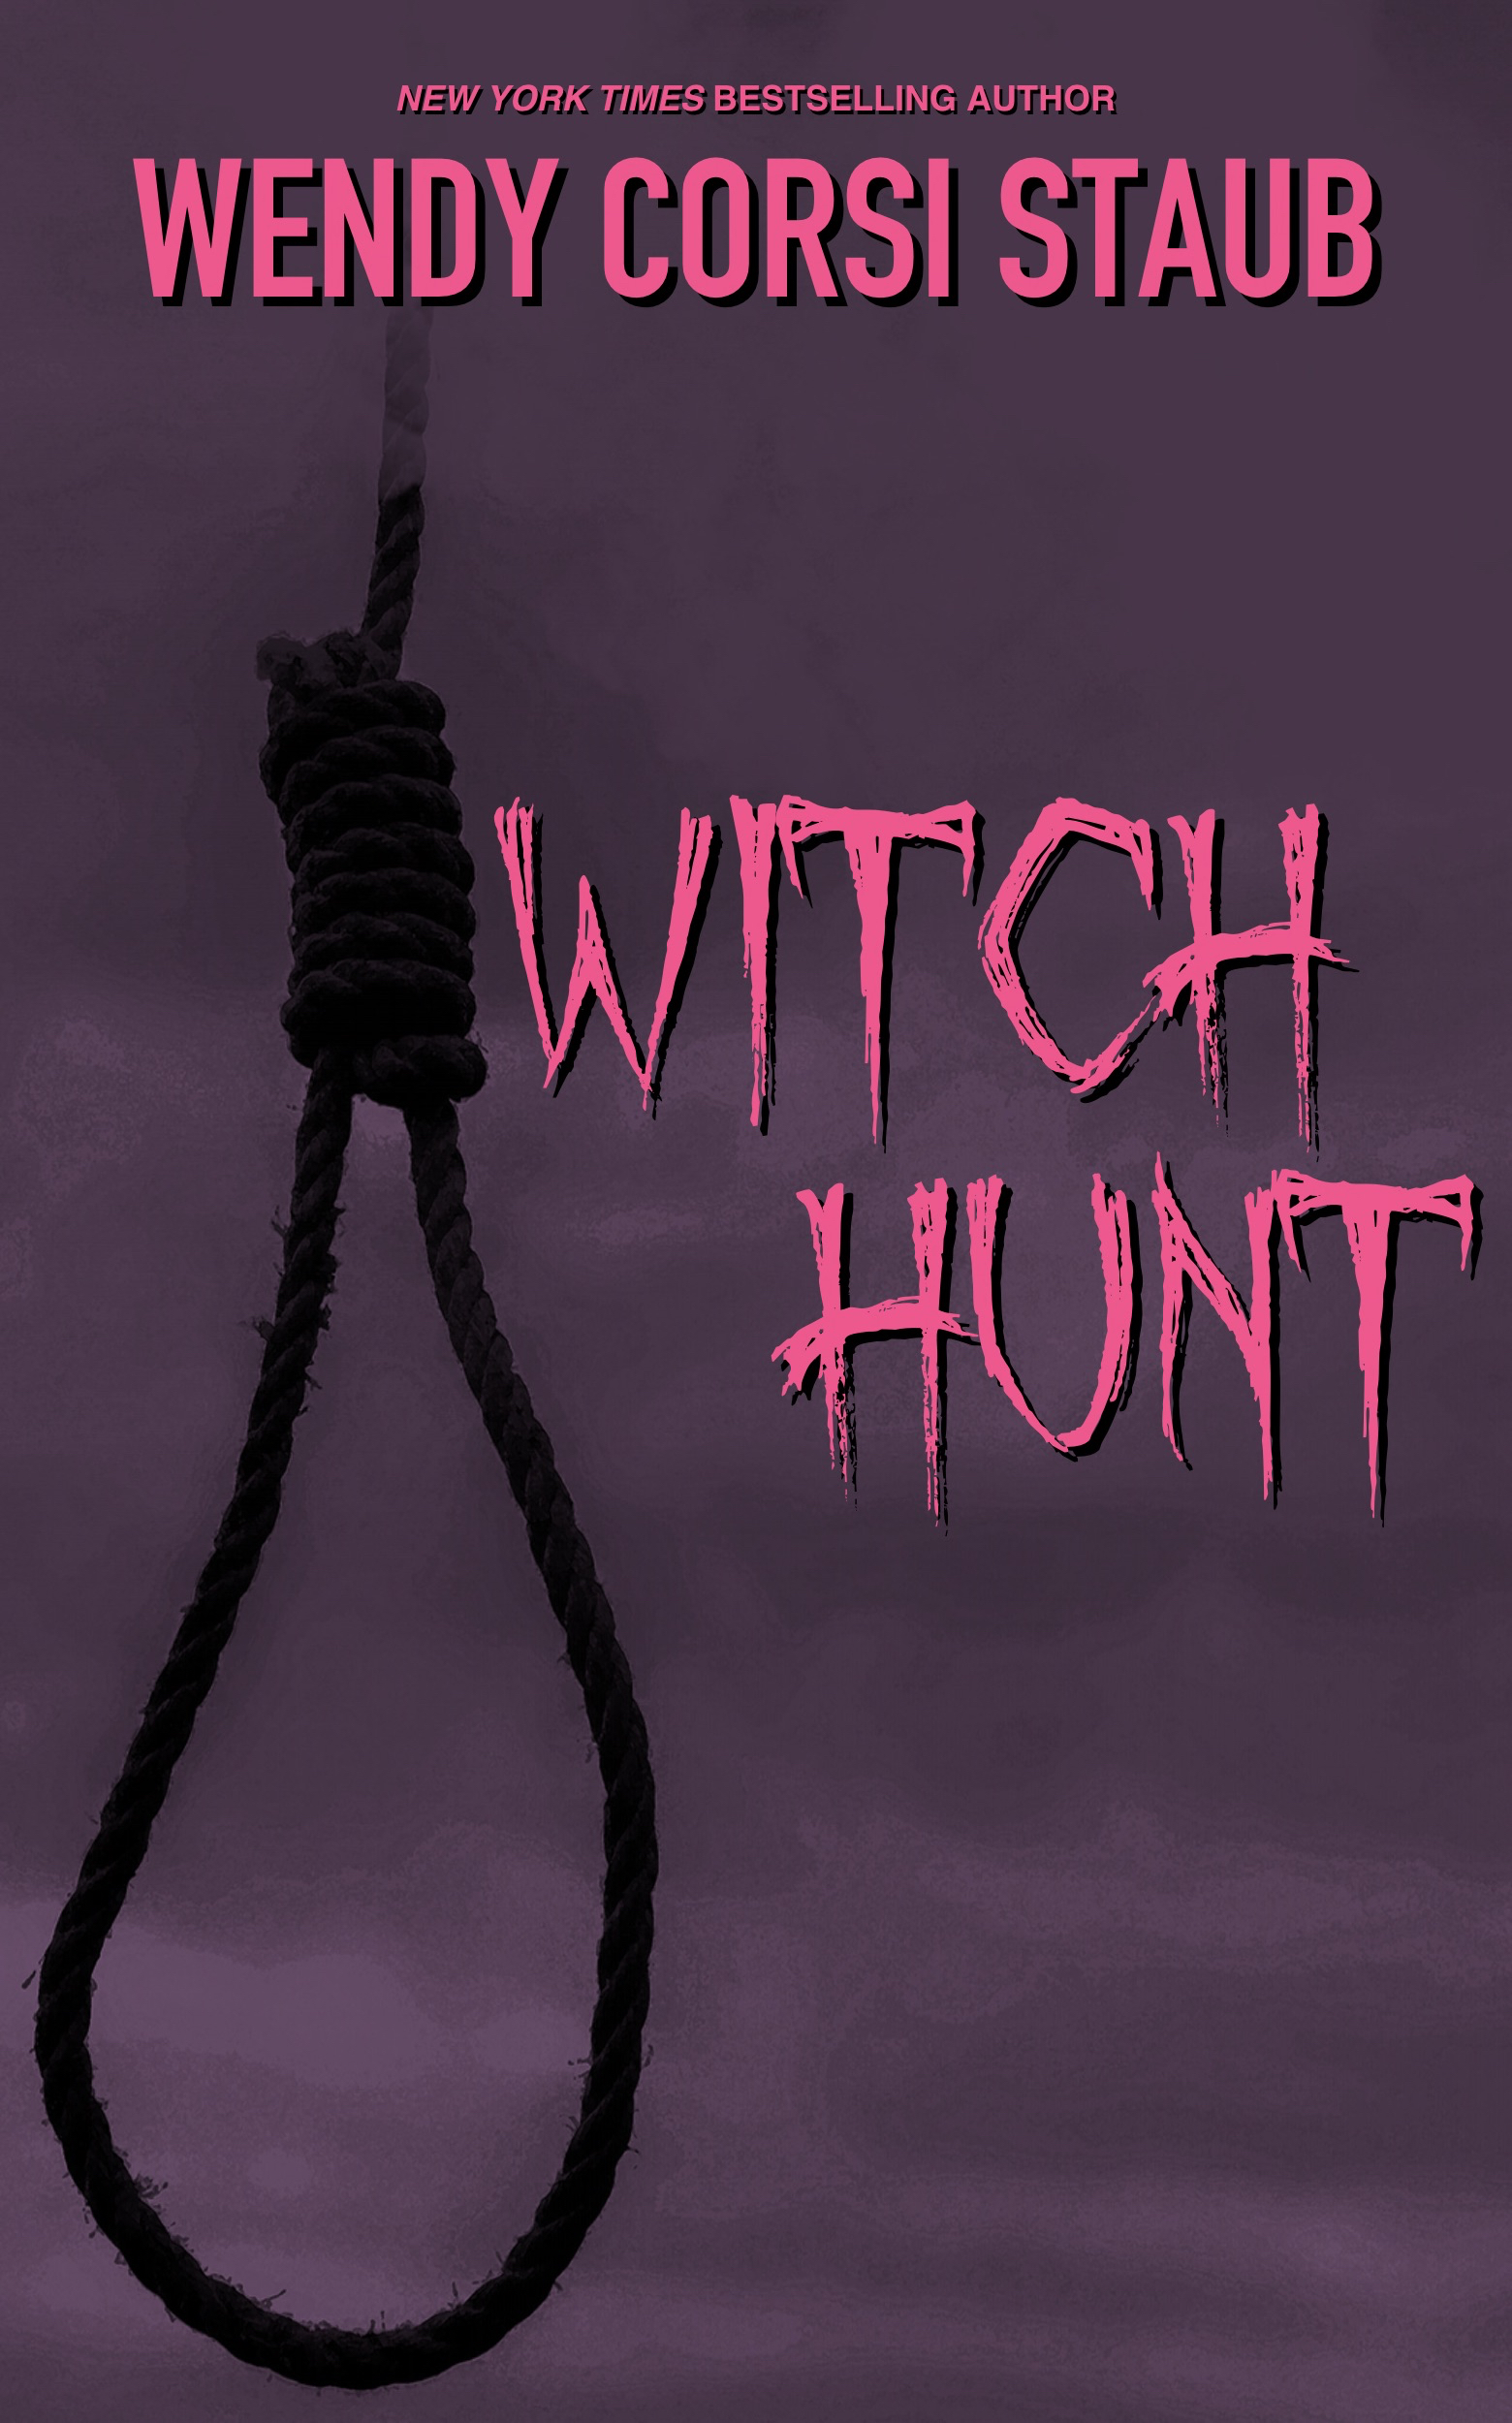 WITCHHUNT Ebook Cover copy.jpg